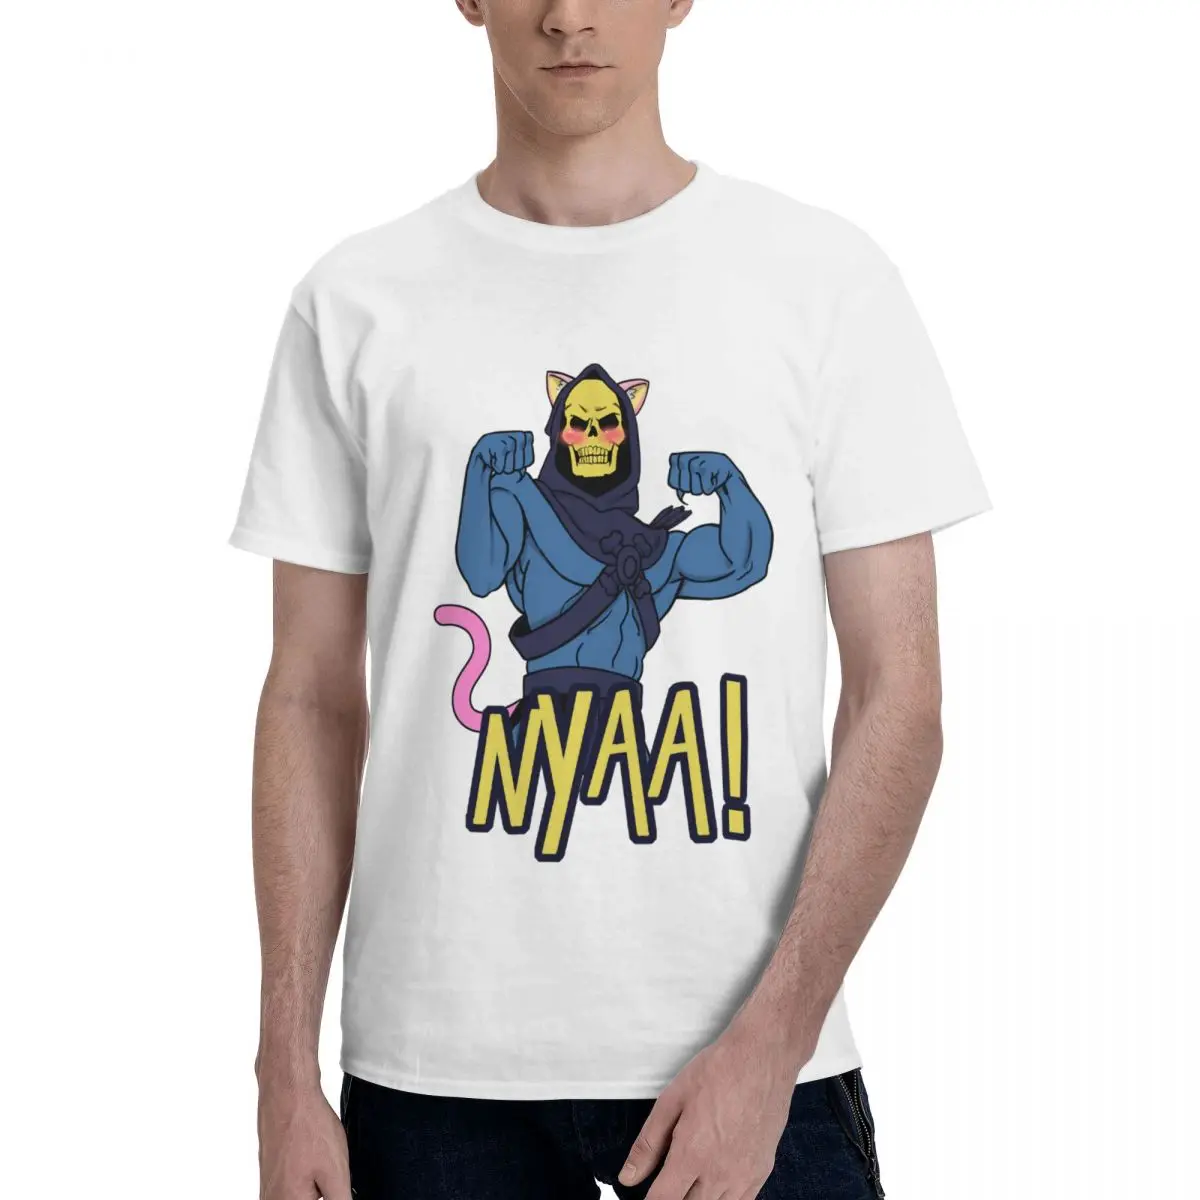 

Skeletor Masters Of The Meowniverse 13 Top tee Leisure Hot Sale Humor Graphic Adult T-shirt Fresh Top quality Eur Size